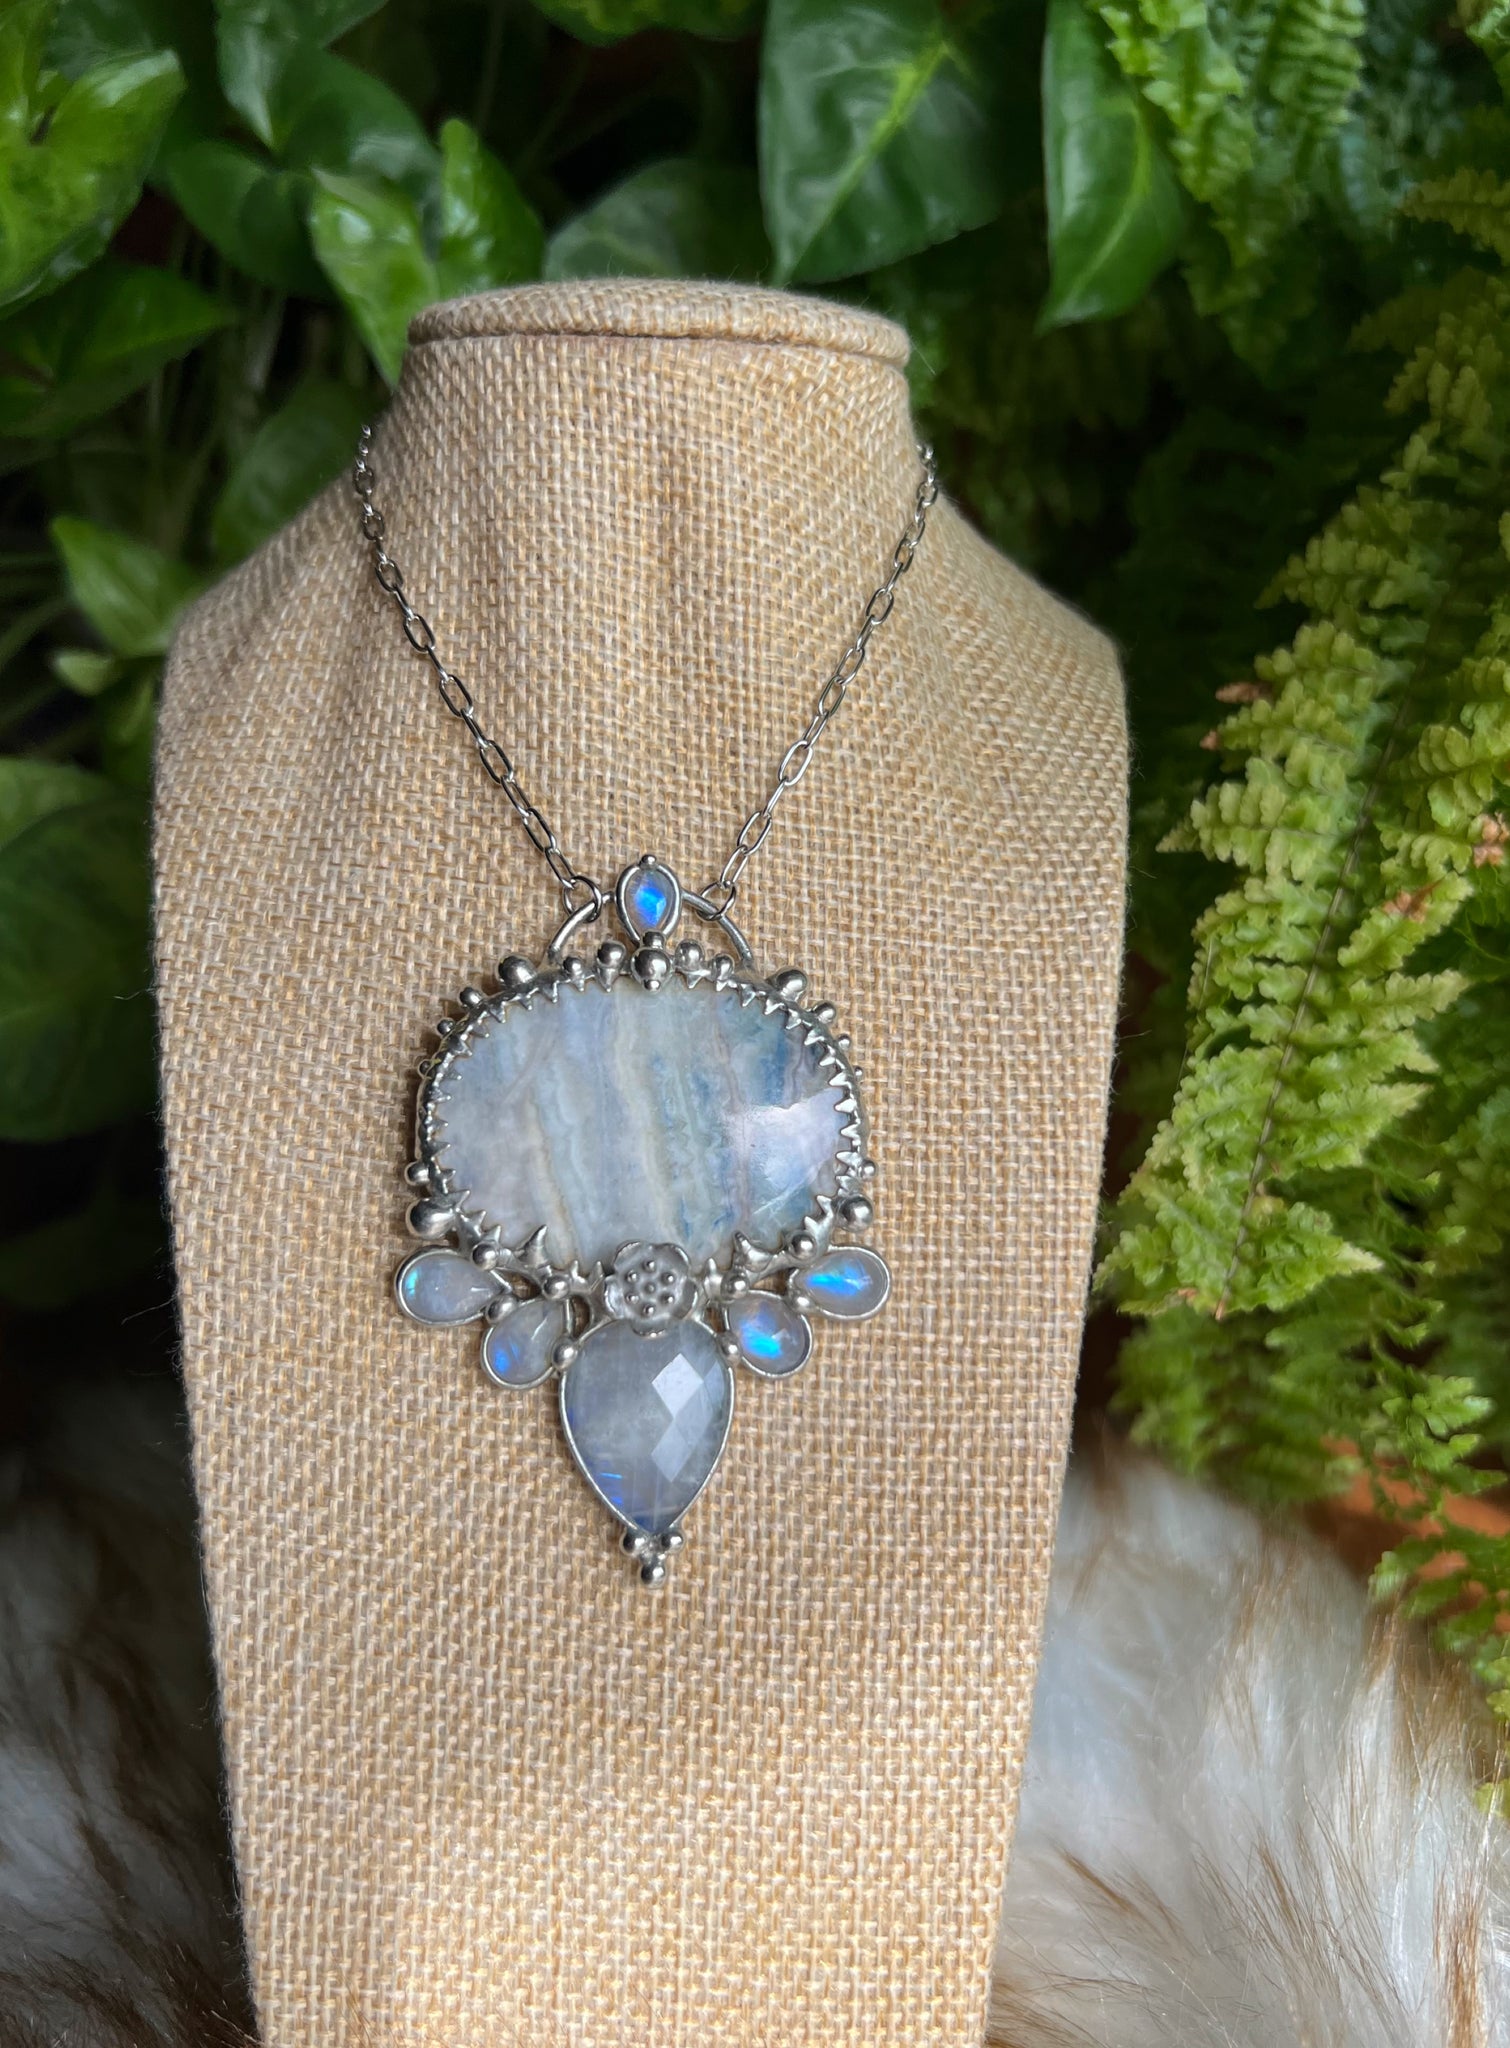 "Oceana" blue lace agate and rainbow moonstone necklace